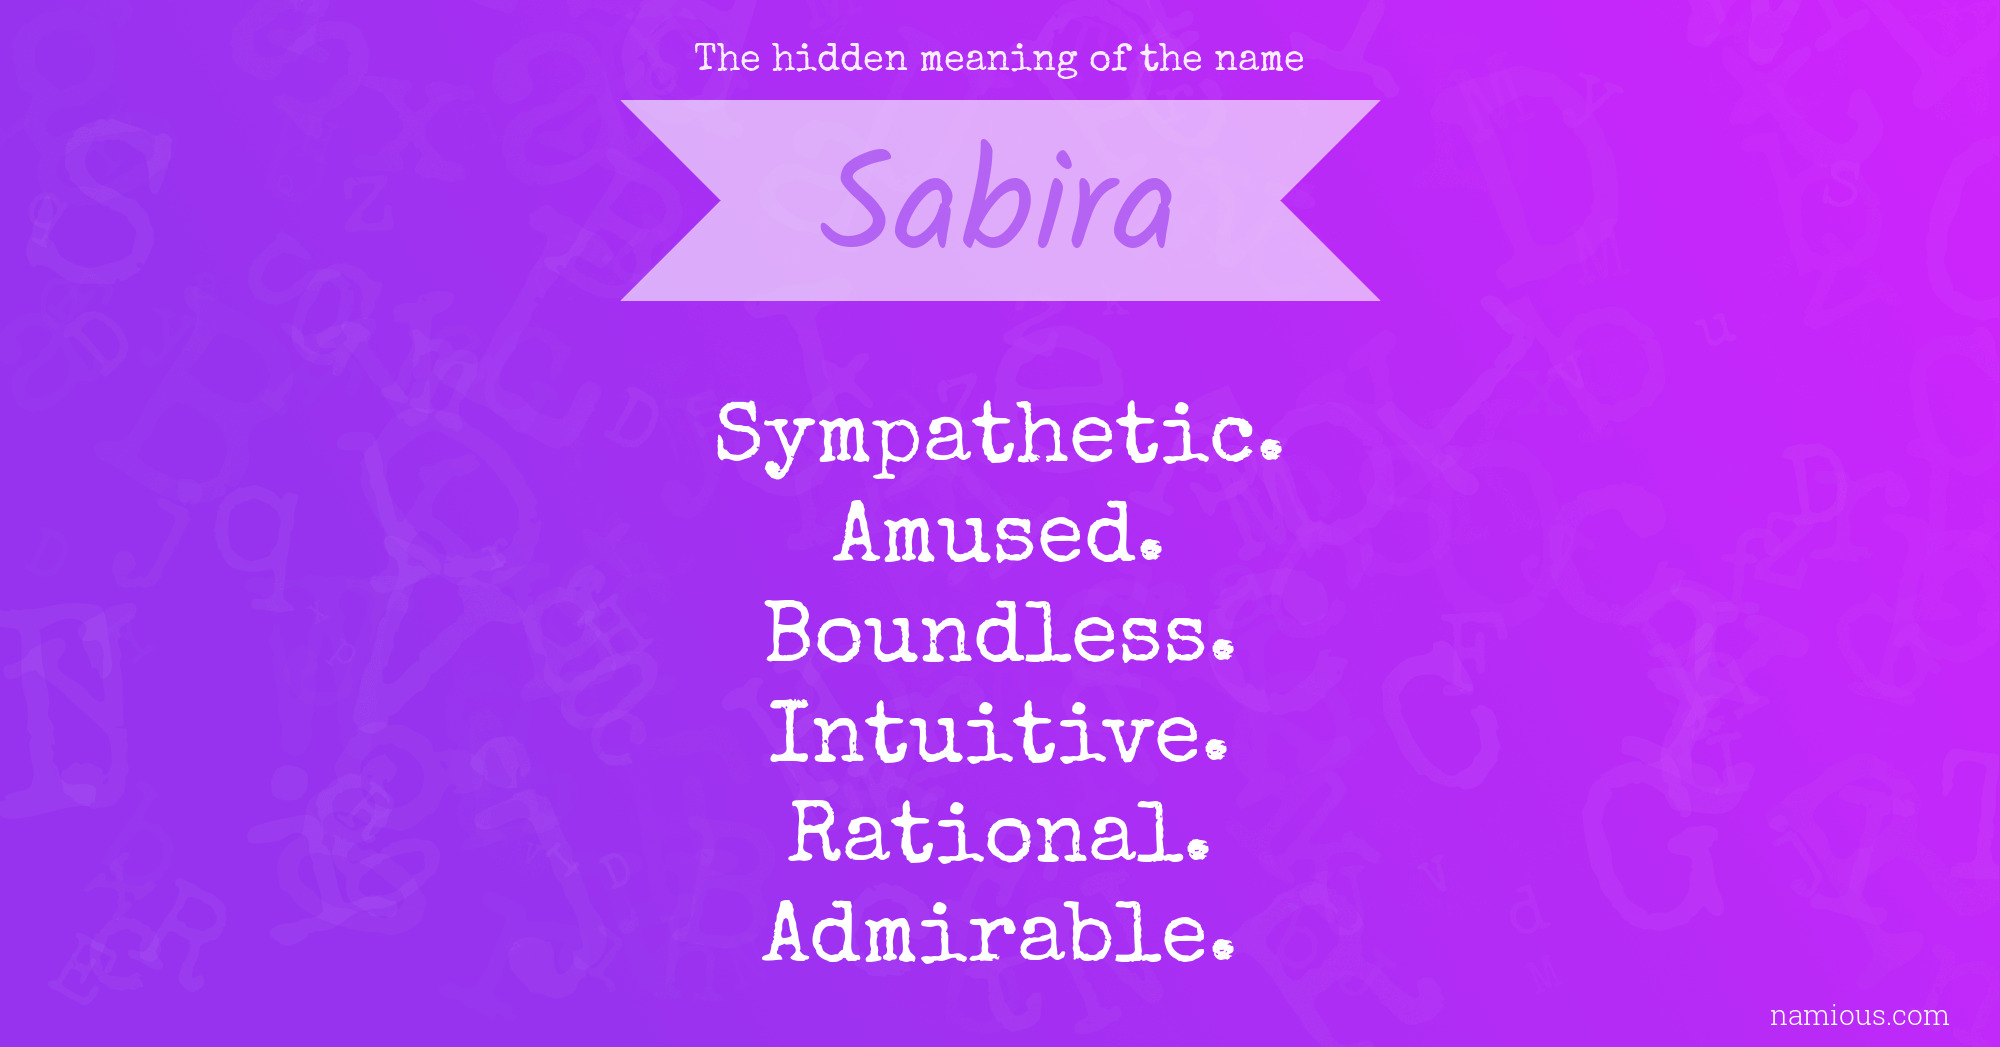 The hidden meaning of the name Sabira